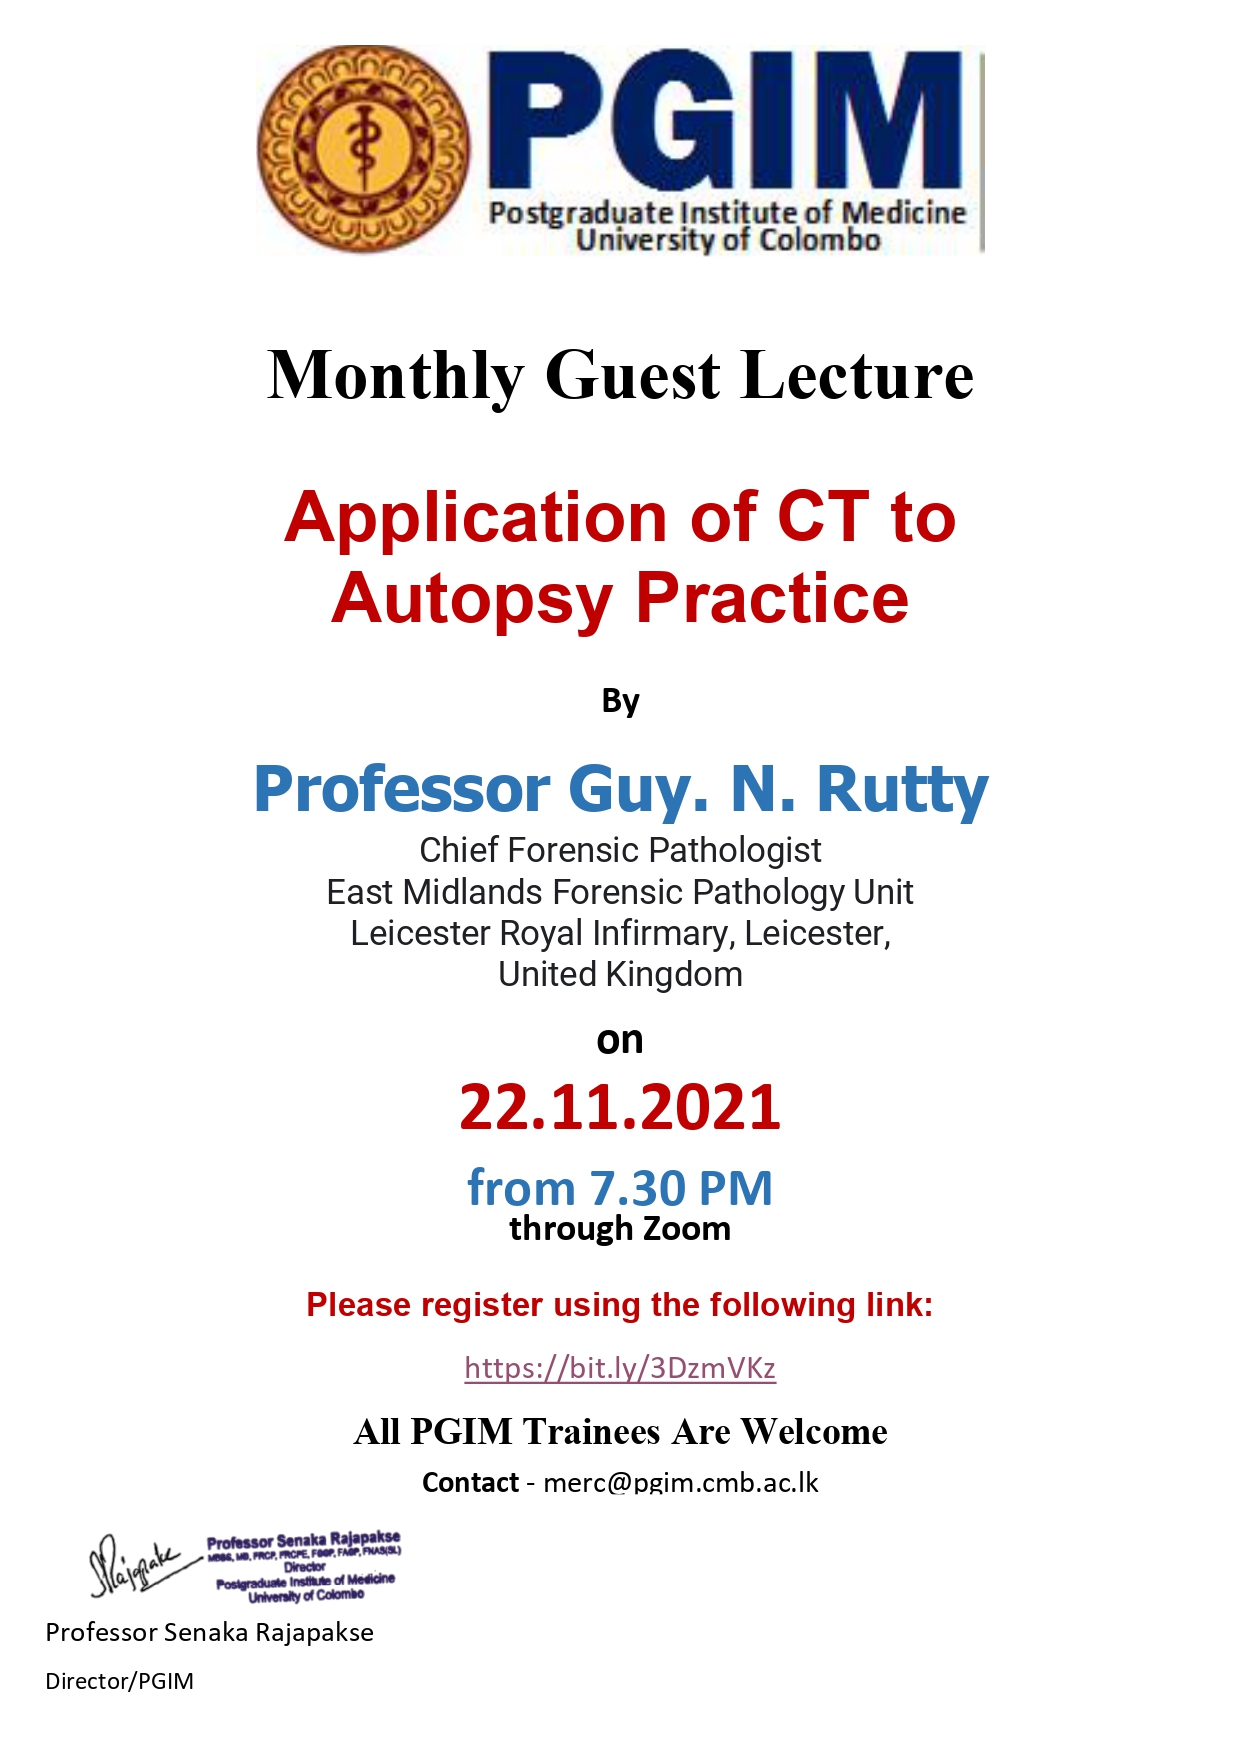 Application of CT to Autopsy Practice  By  Professor Guy. N. Rutty